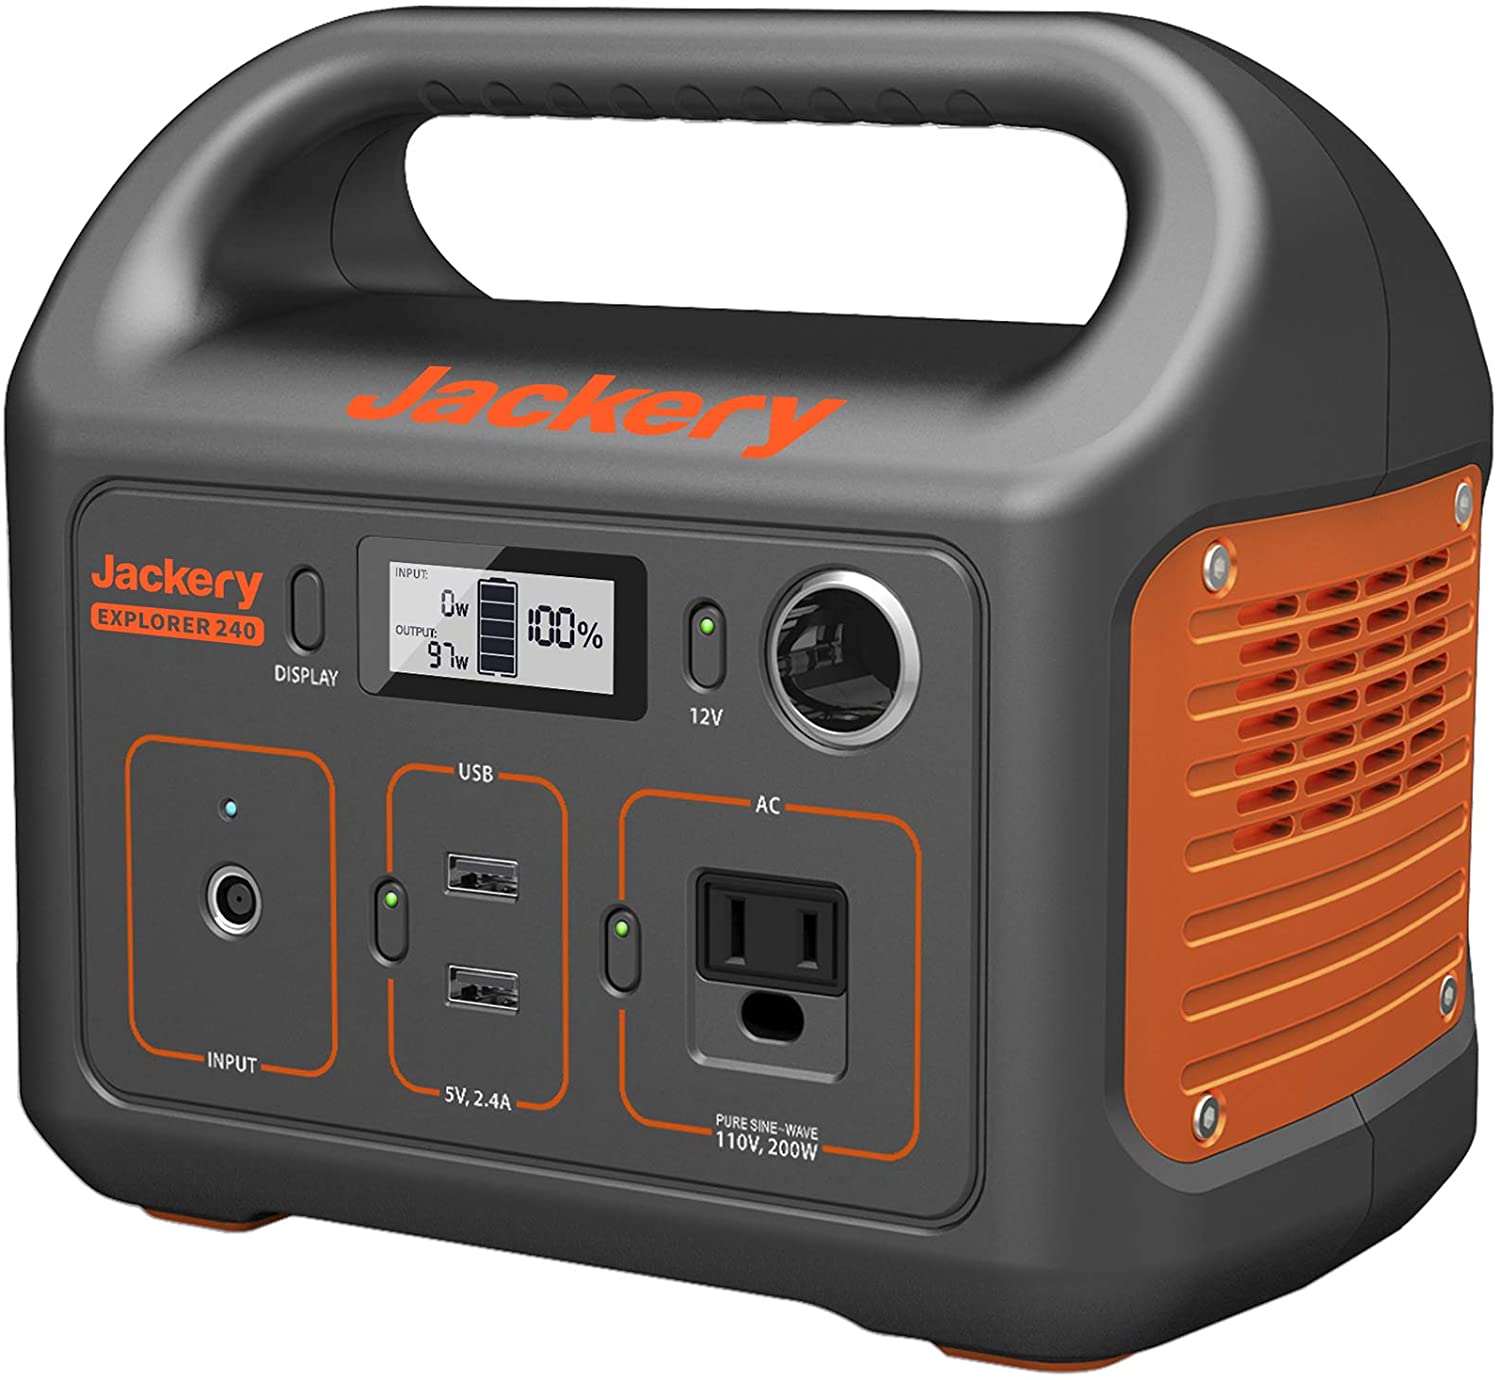 Jackery Amazon Prime Day Deals! Explorer Discounts, SolarSaga Discounts, Almost All Sizes From E160 Watts to E1000 Watts and Solar 60 Watt to S100W Many Look Like 30% Off Coupons!